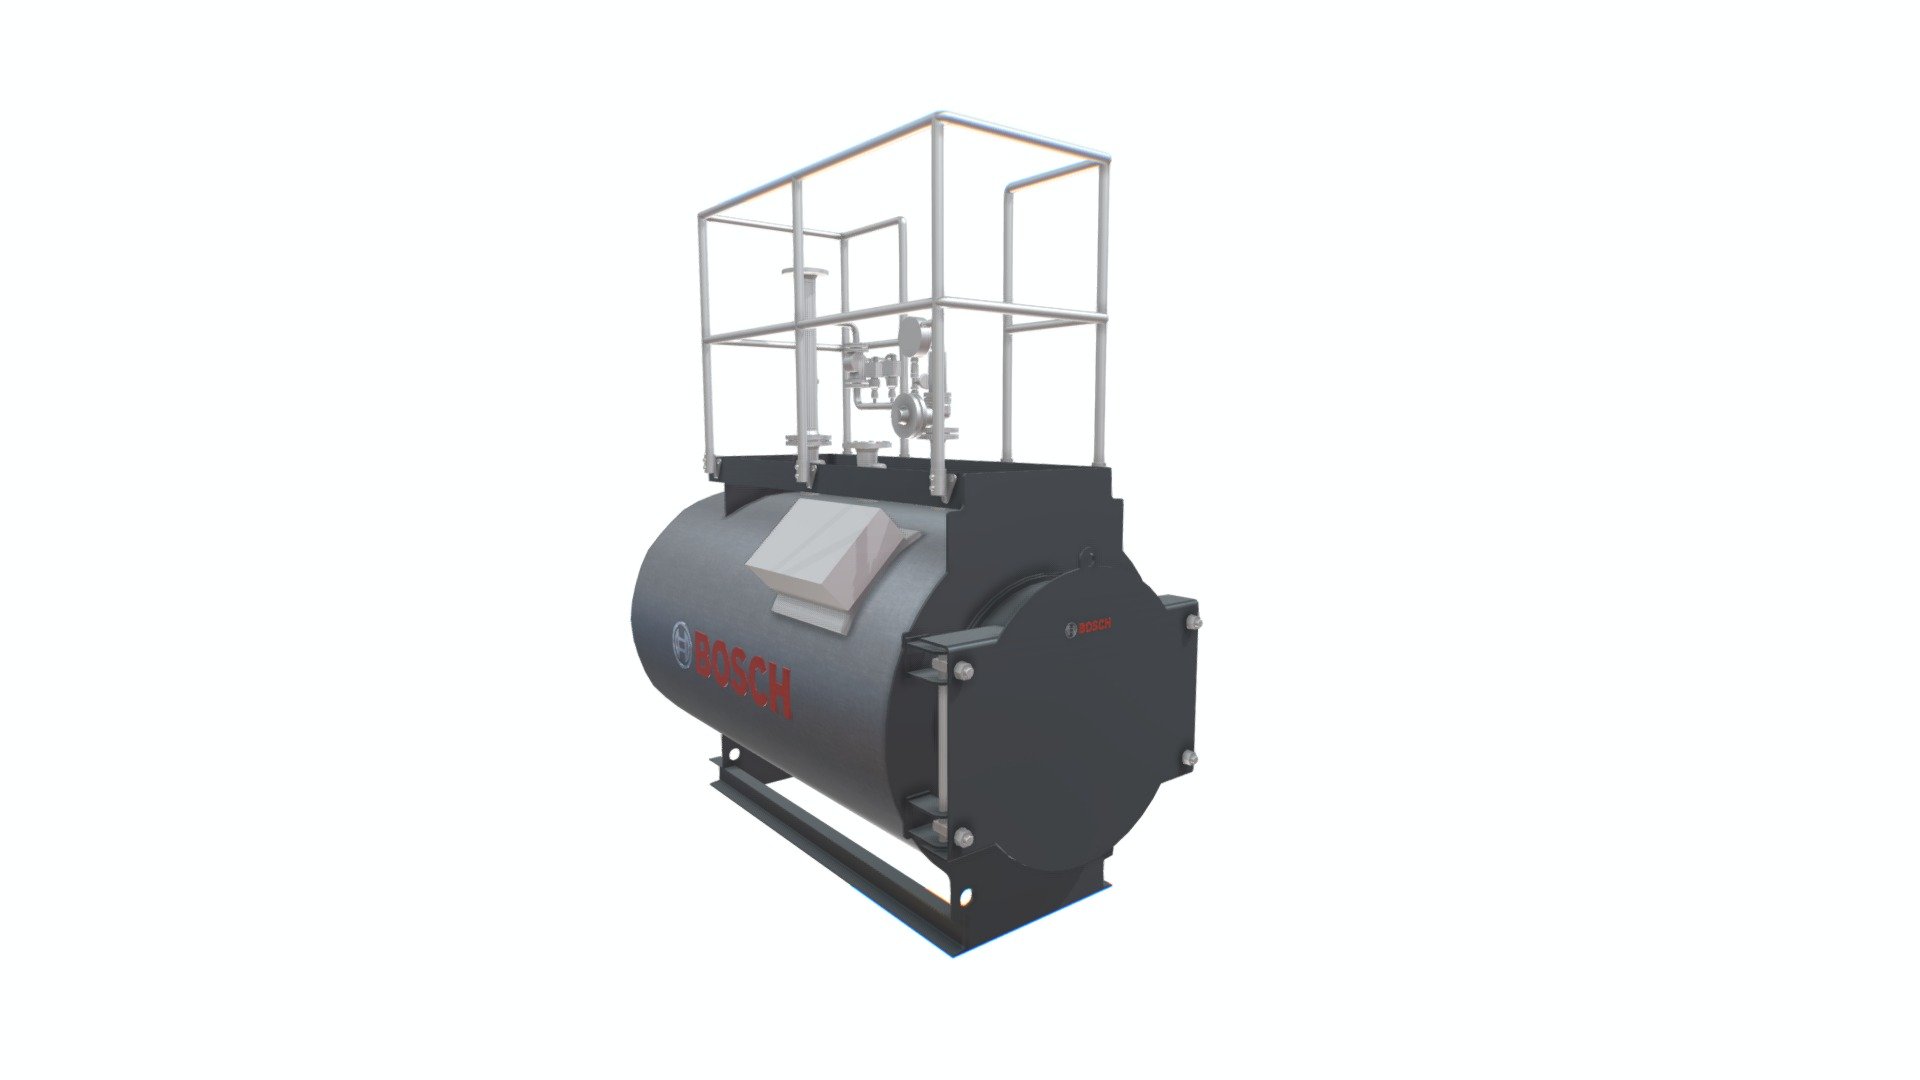 The UNIMAT UT-L three-pass design has proven its worth for industrial heating systems. Our versatile steel boilers are CE certified and are designed and equipped in compliance with the European Pressure Equipment Directive - Bosch - UNIMAT UT-L Steel Hot Water Boiler - 3D model by bimstore (@Revitspace) 3d model